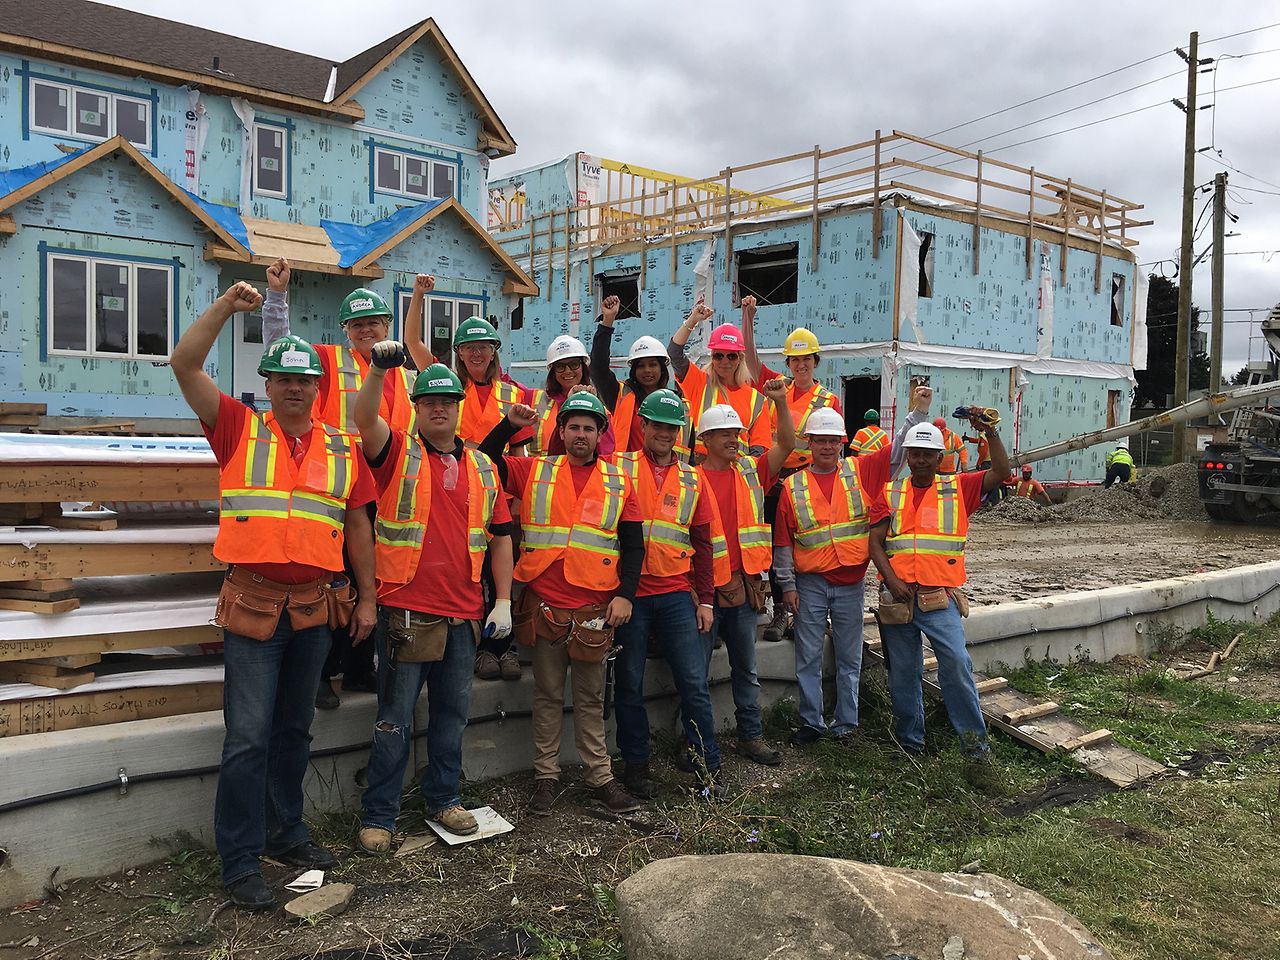 Henkel volunteers from our Mississauga, Canada office give a cheer at the start of their day building townhouses with Habitat for Humanity®.